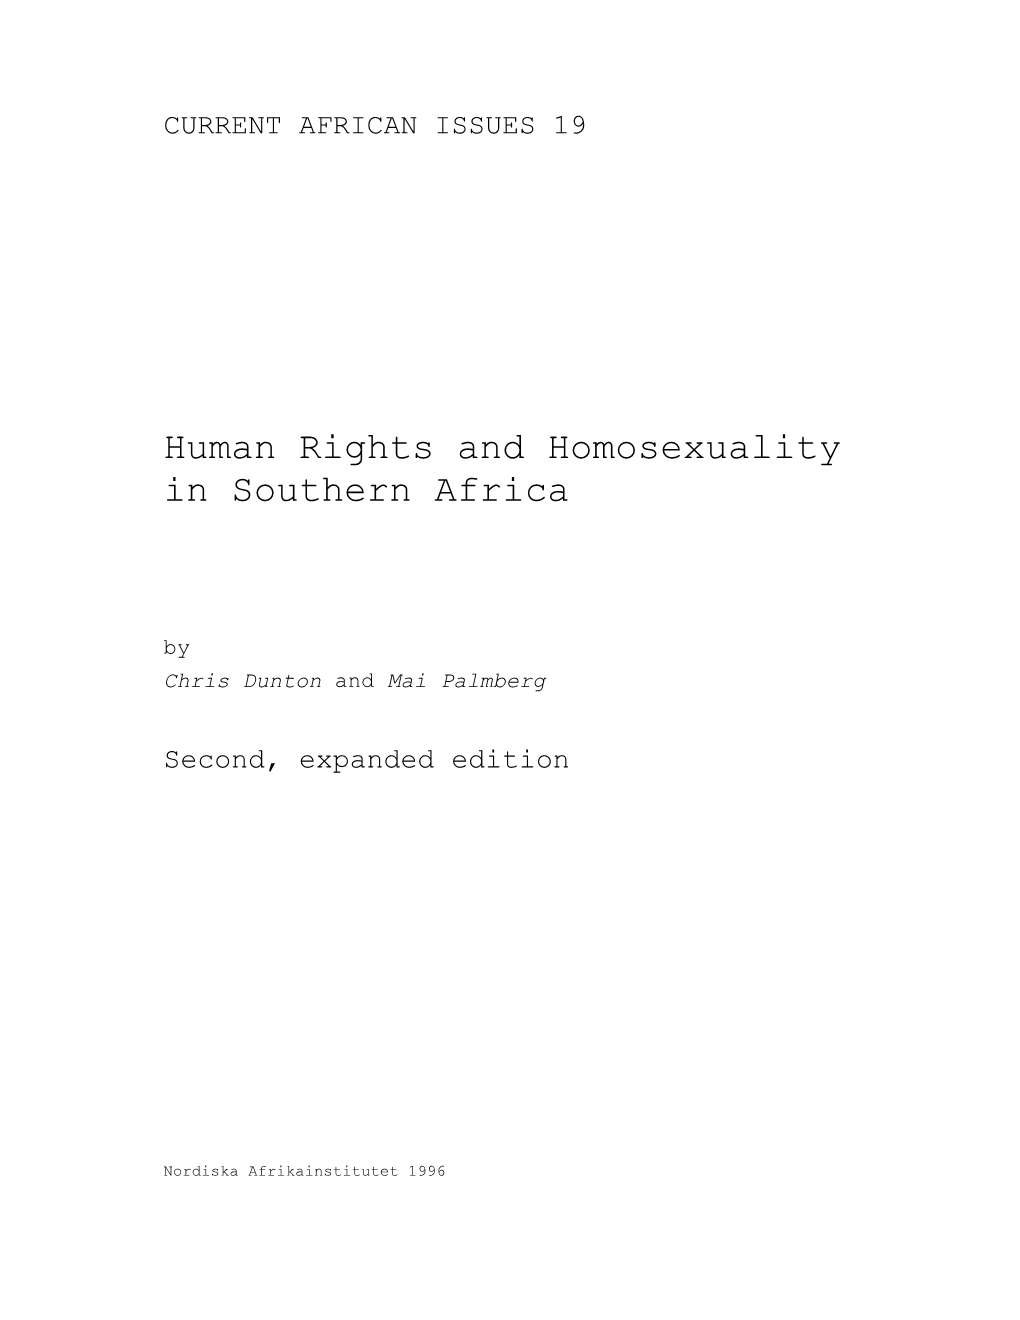 Human Rights and Homosexuality in Southern Africa